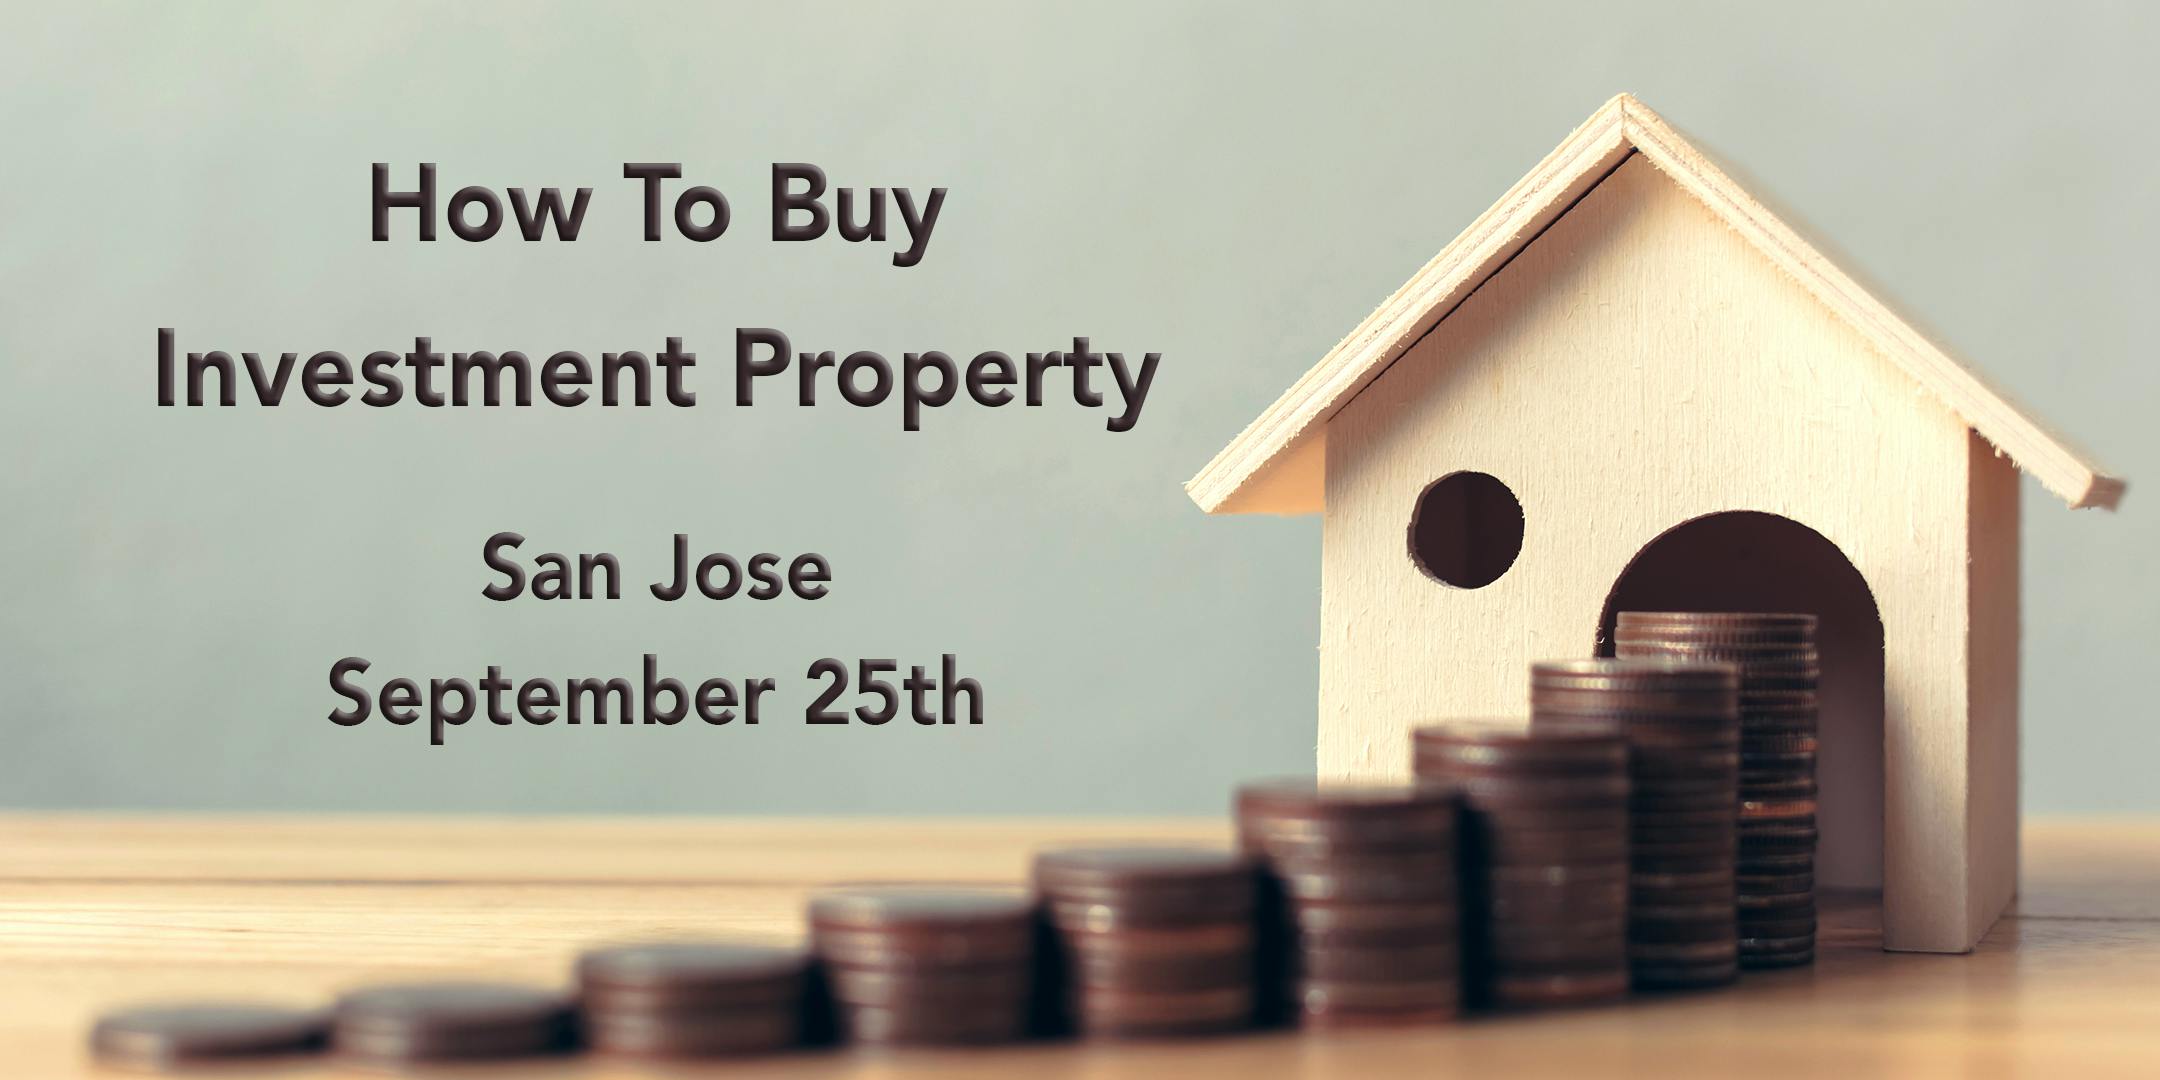 How To Buy Investment Property